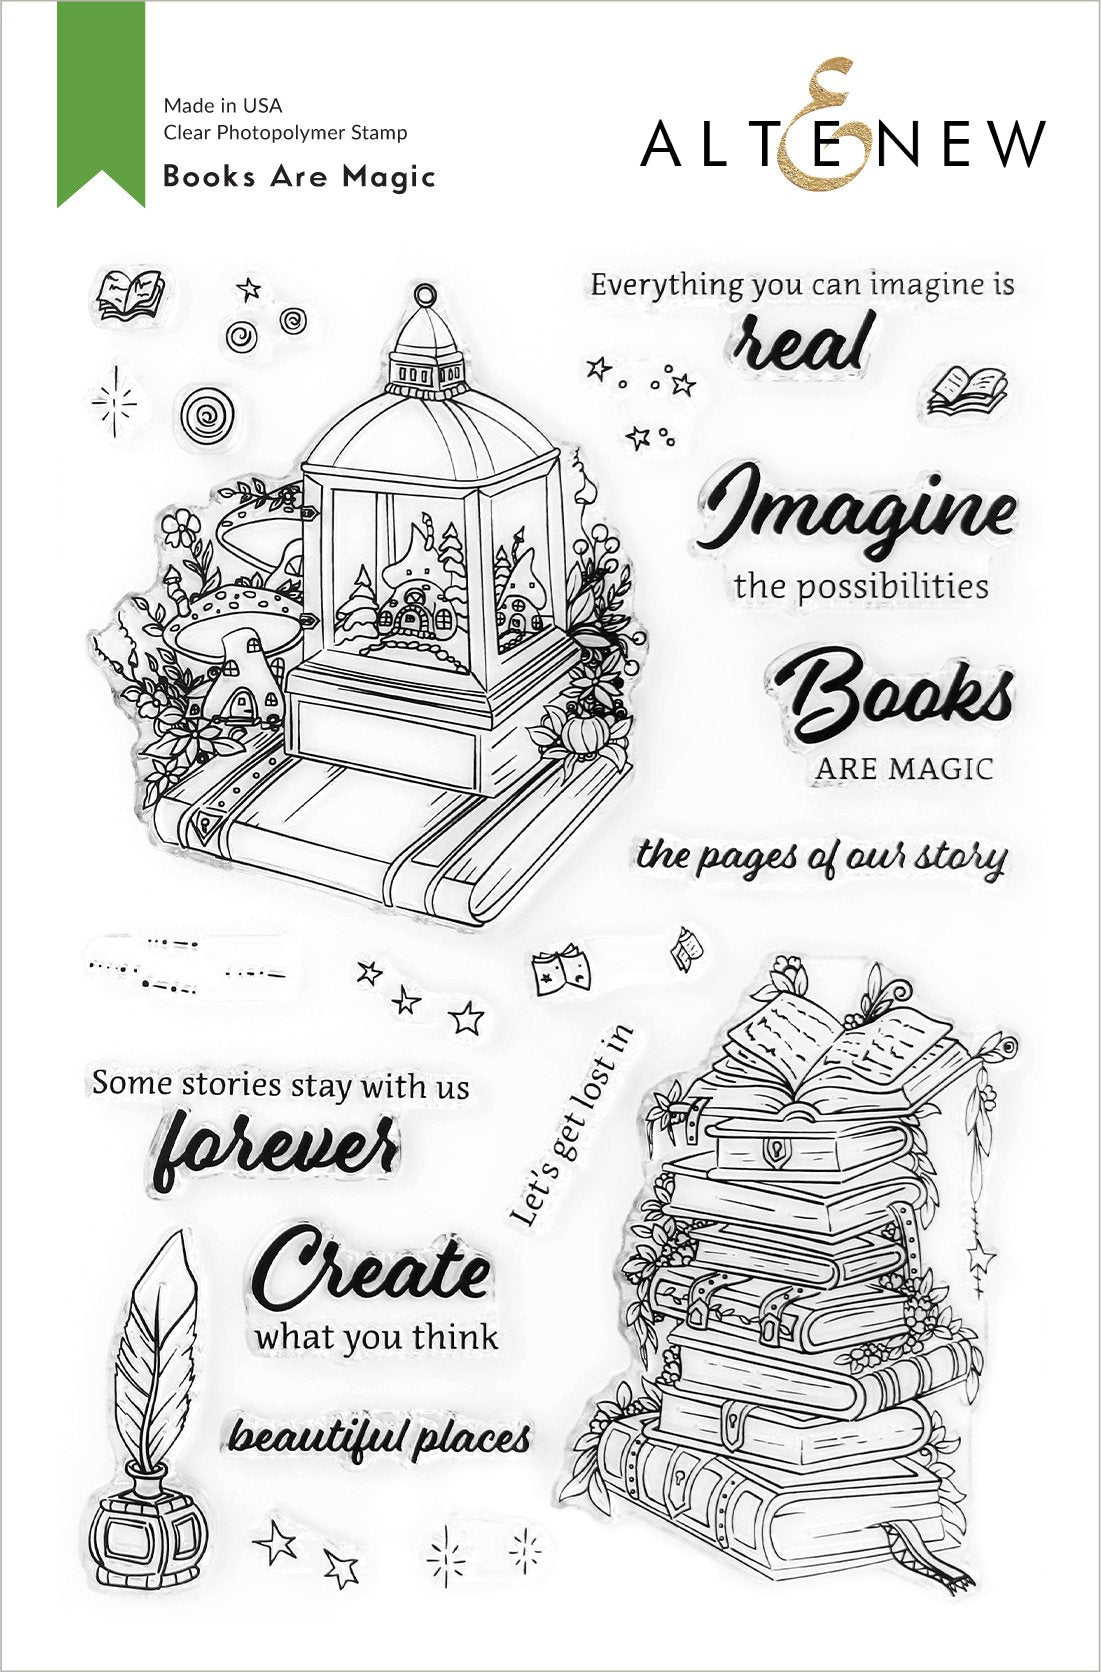 Altenew - Books Are Magic (stamp set) - out of stock